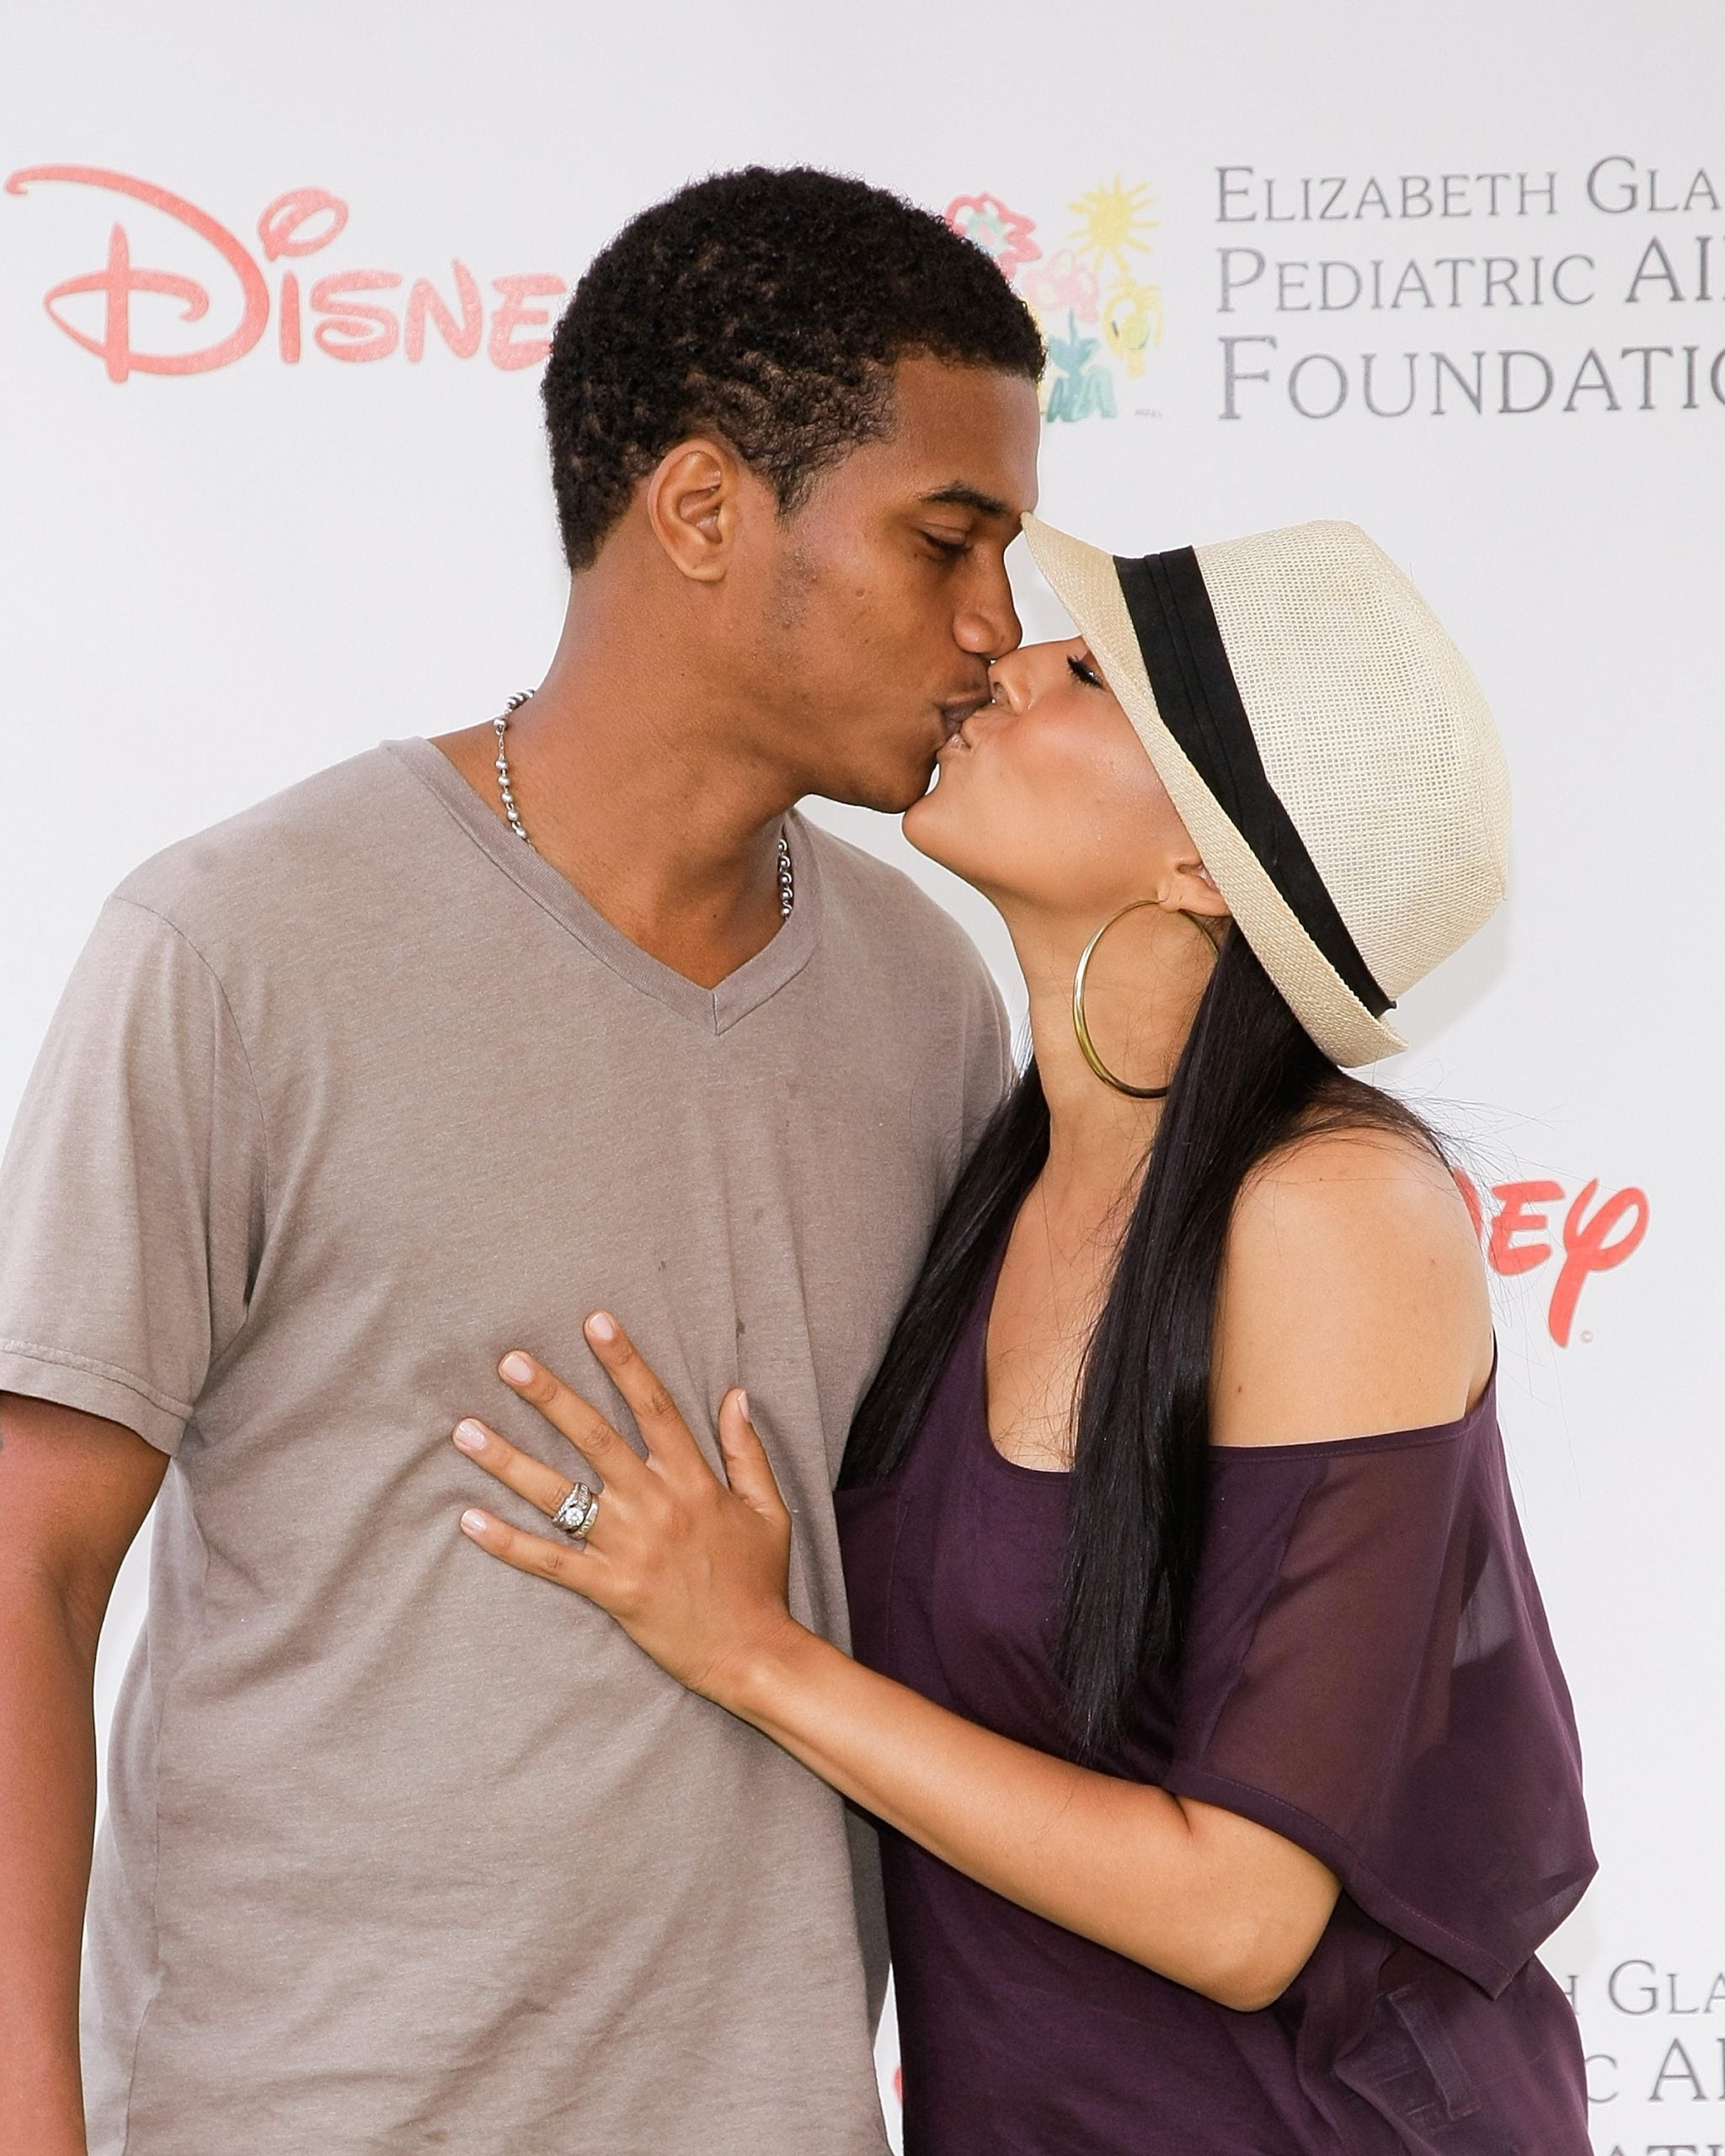 Then and Now: Tia Mowry and Cory Hardrict's Love Through The Years